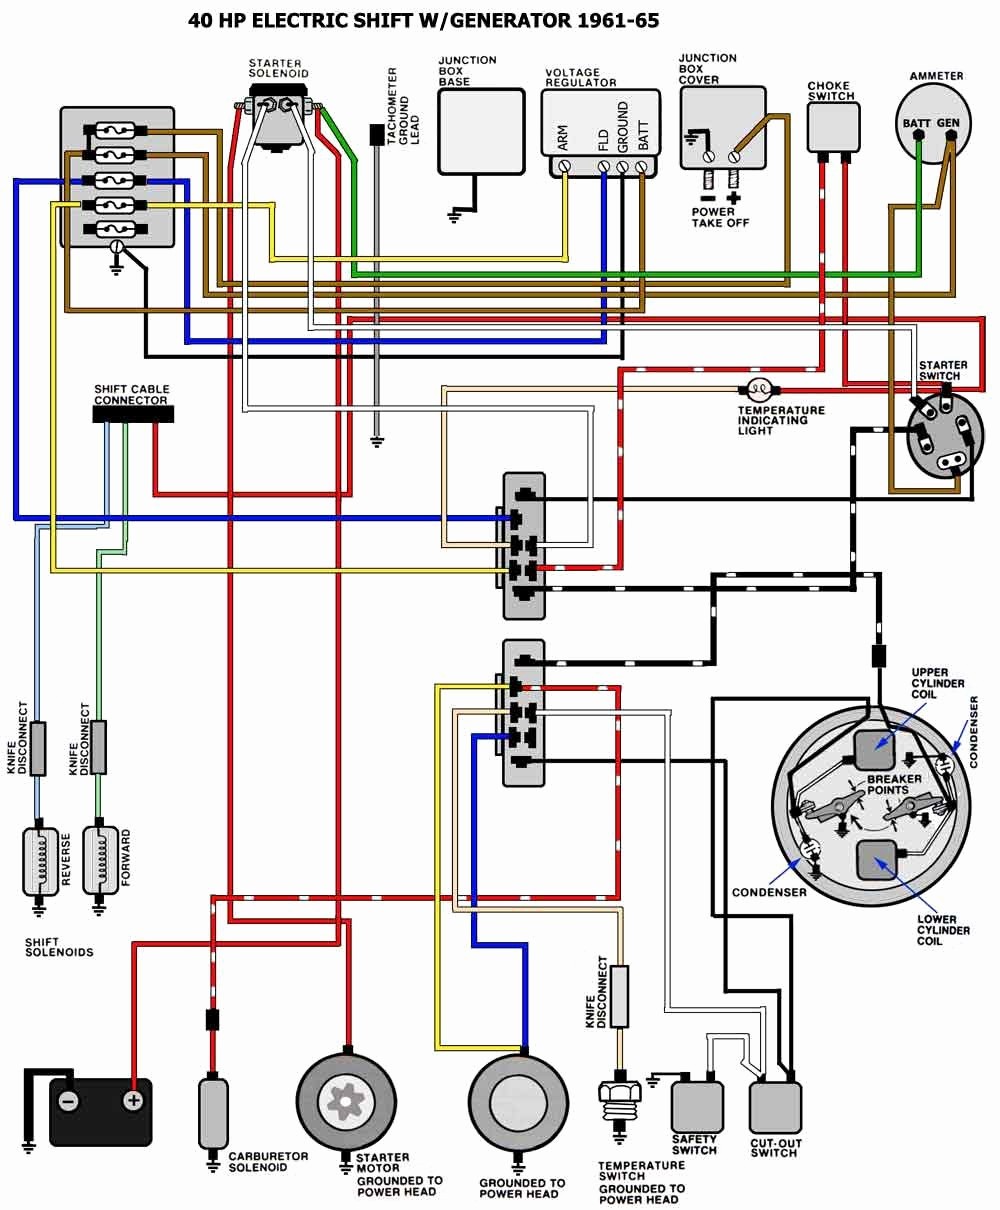 40 Hp Mercury Outboard Wiring Diagram Moreover Johnson Outboard Johnson Outboard Ignition Switch